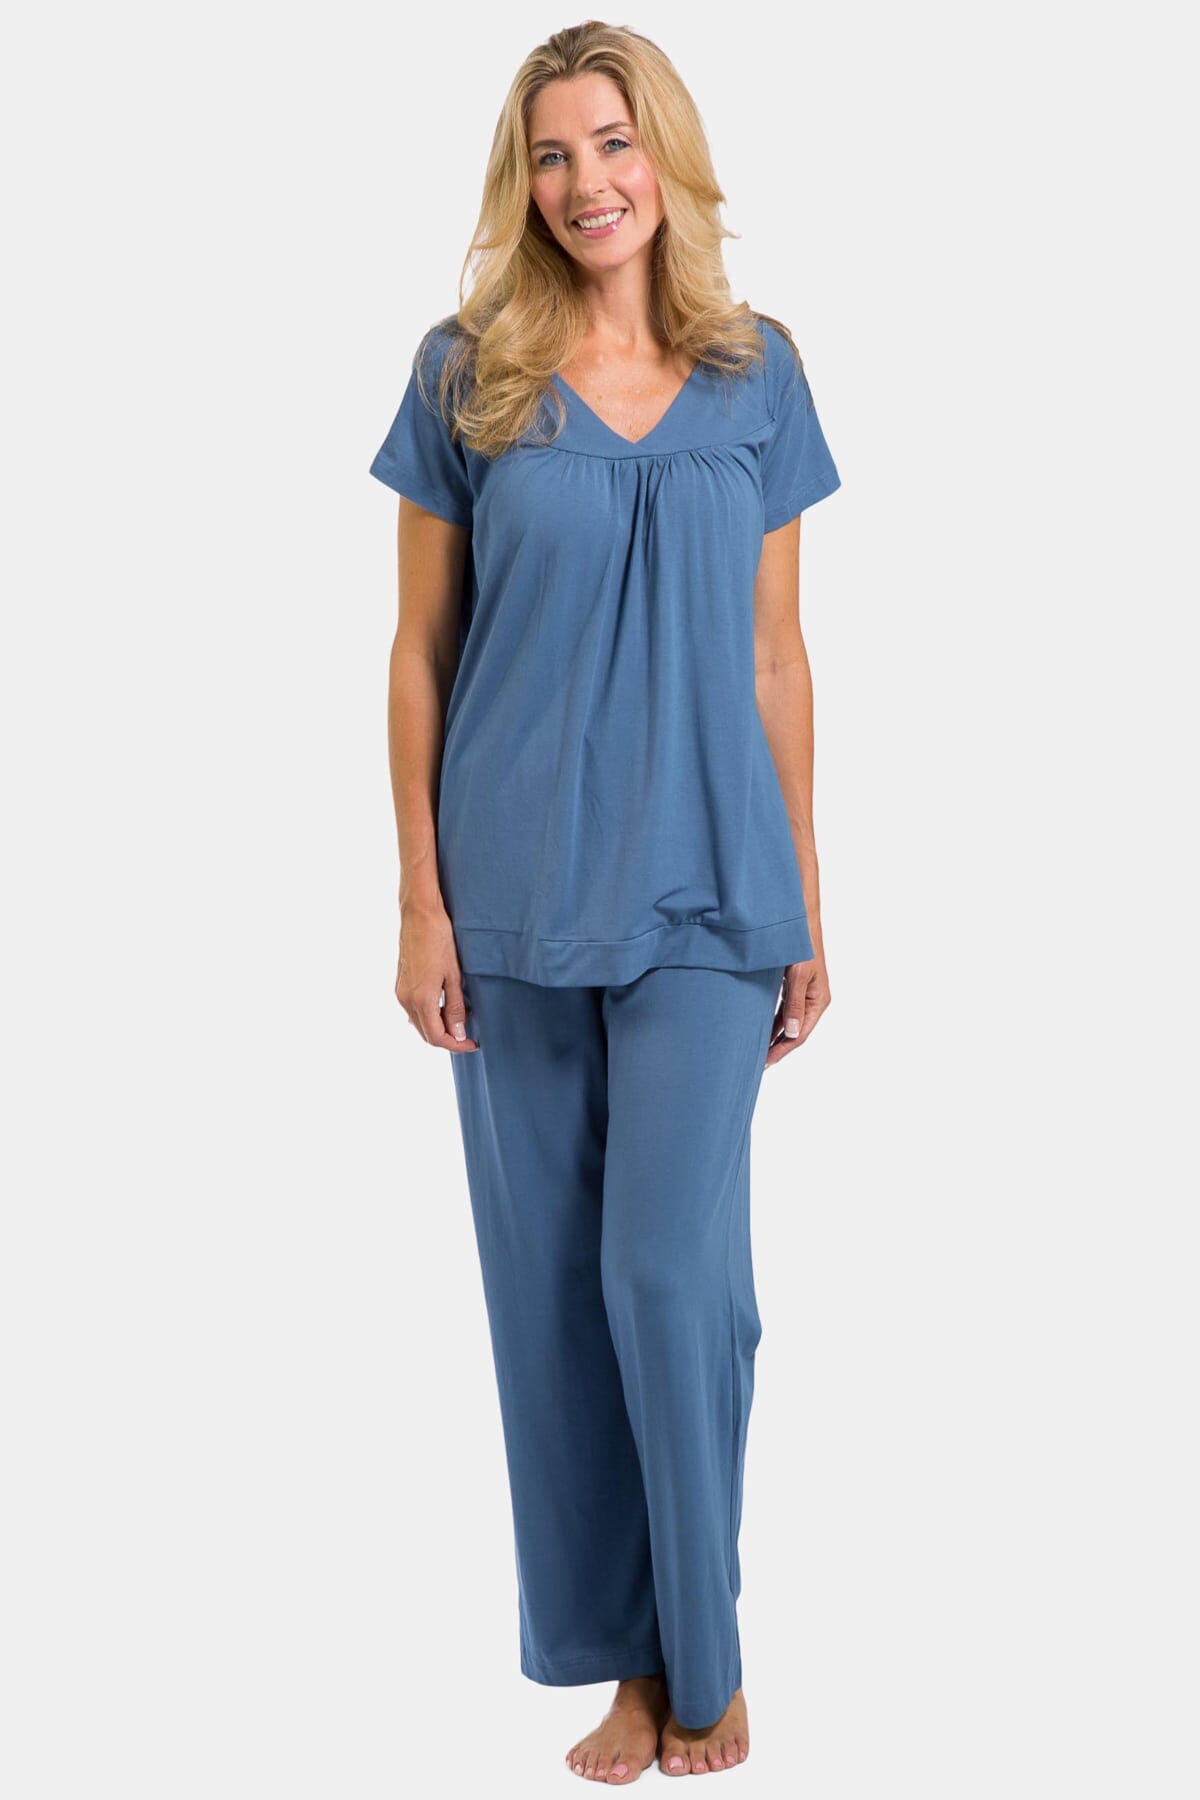 Women's Jersey Pajama Set with Gift Box- Short Sleeve Top and Full Length Pant Womens>Sleep and Lounge>Pajamas Fishers Finery Moonlight Blue XS 